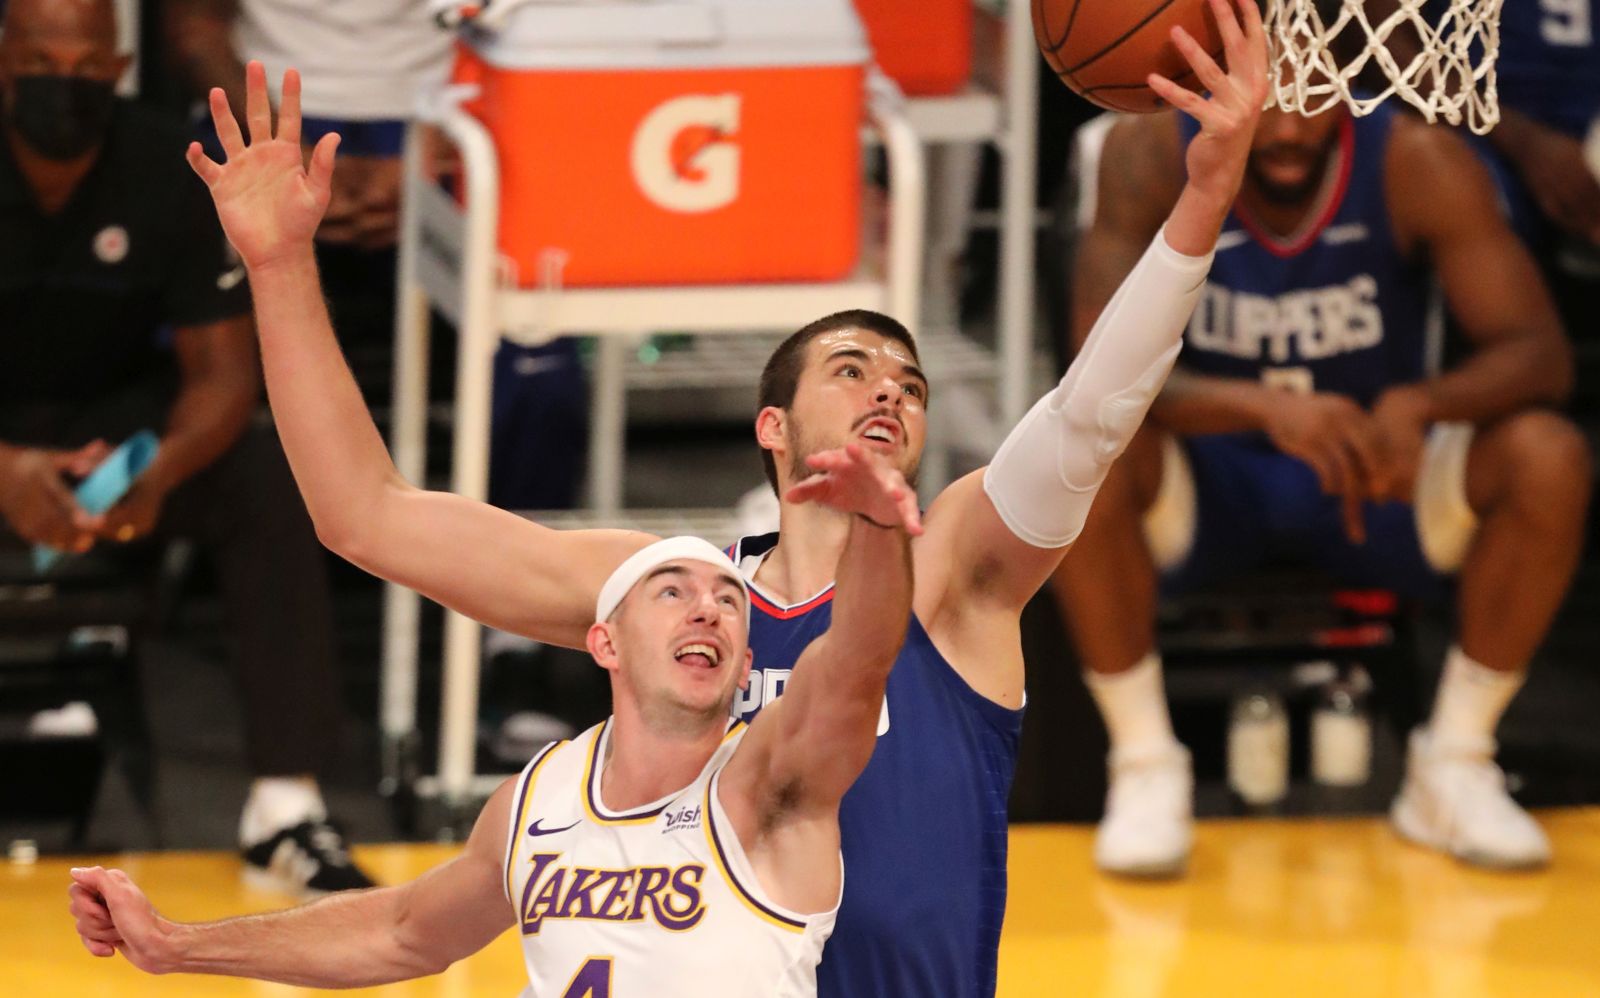 epa08878425 Alex Caruso of Los Angeles Lakers and Ivica Zubac of Los Angeles Clippers reach for the ball during an NBA preseason game between Los Angeles Lakers and Los Angeles Clippers in Los Angeles, California, USA, 11 December 2020.  EPA/DAVID SWANSON SHUTTERSTOCK OUT